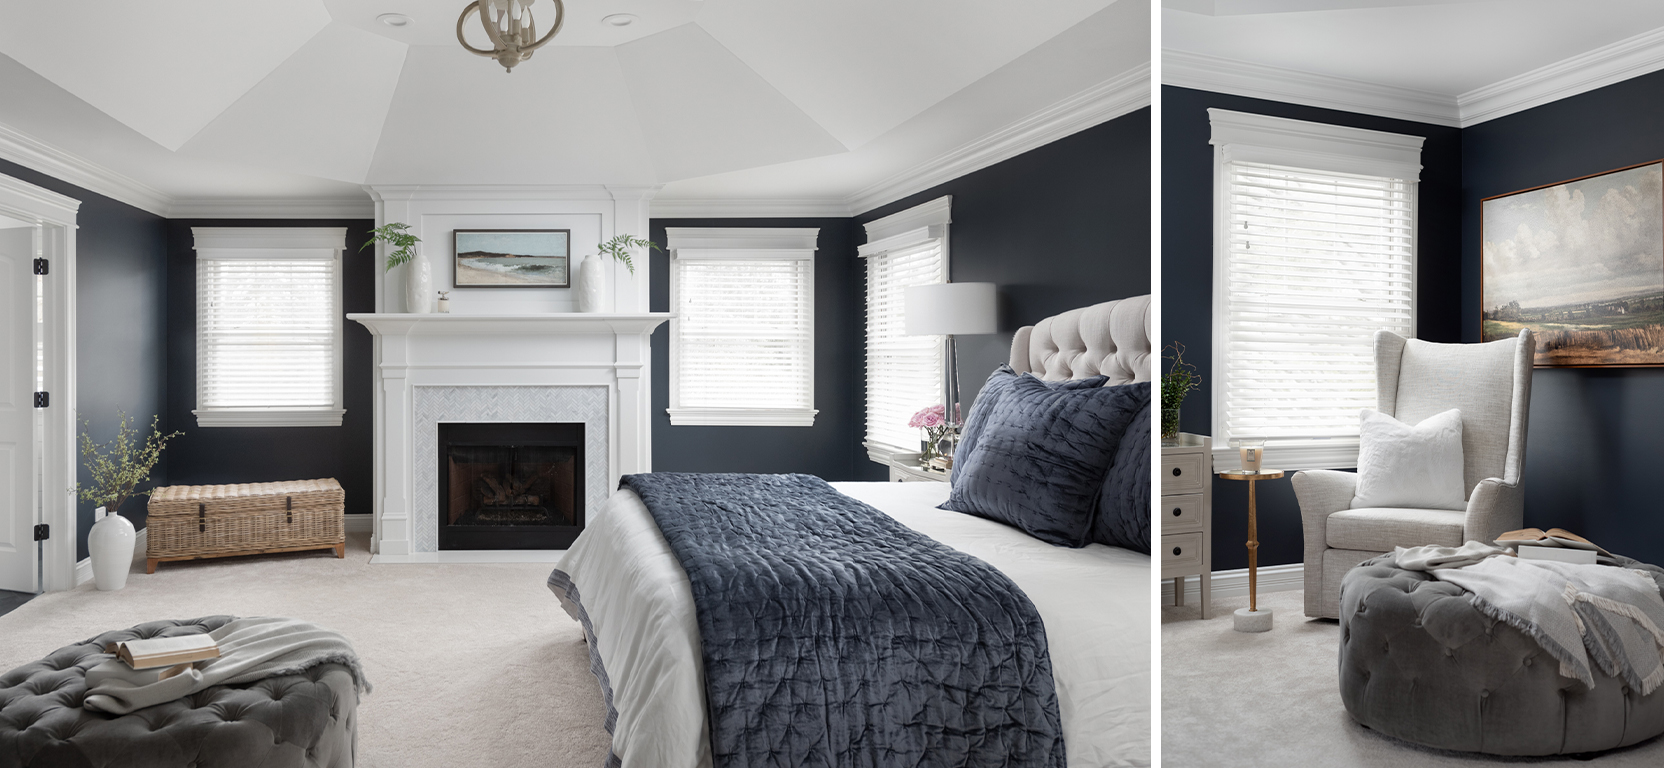 Bedroom showing king bed with tufted headboard, vaulted white ceilings and fireplace, dark charcoal walls, and armchair in corner.